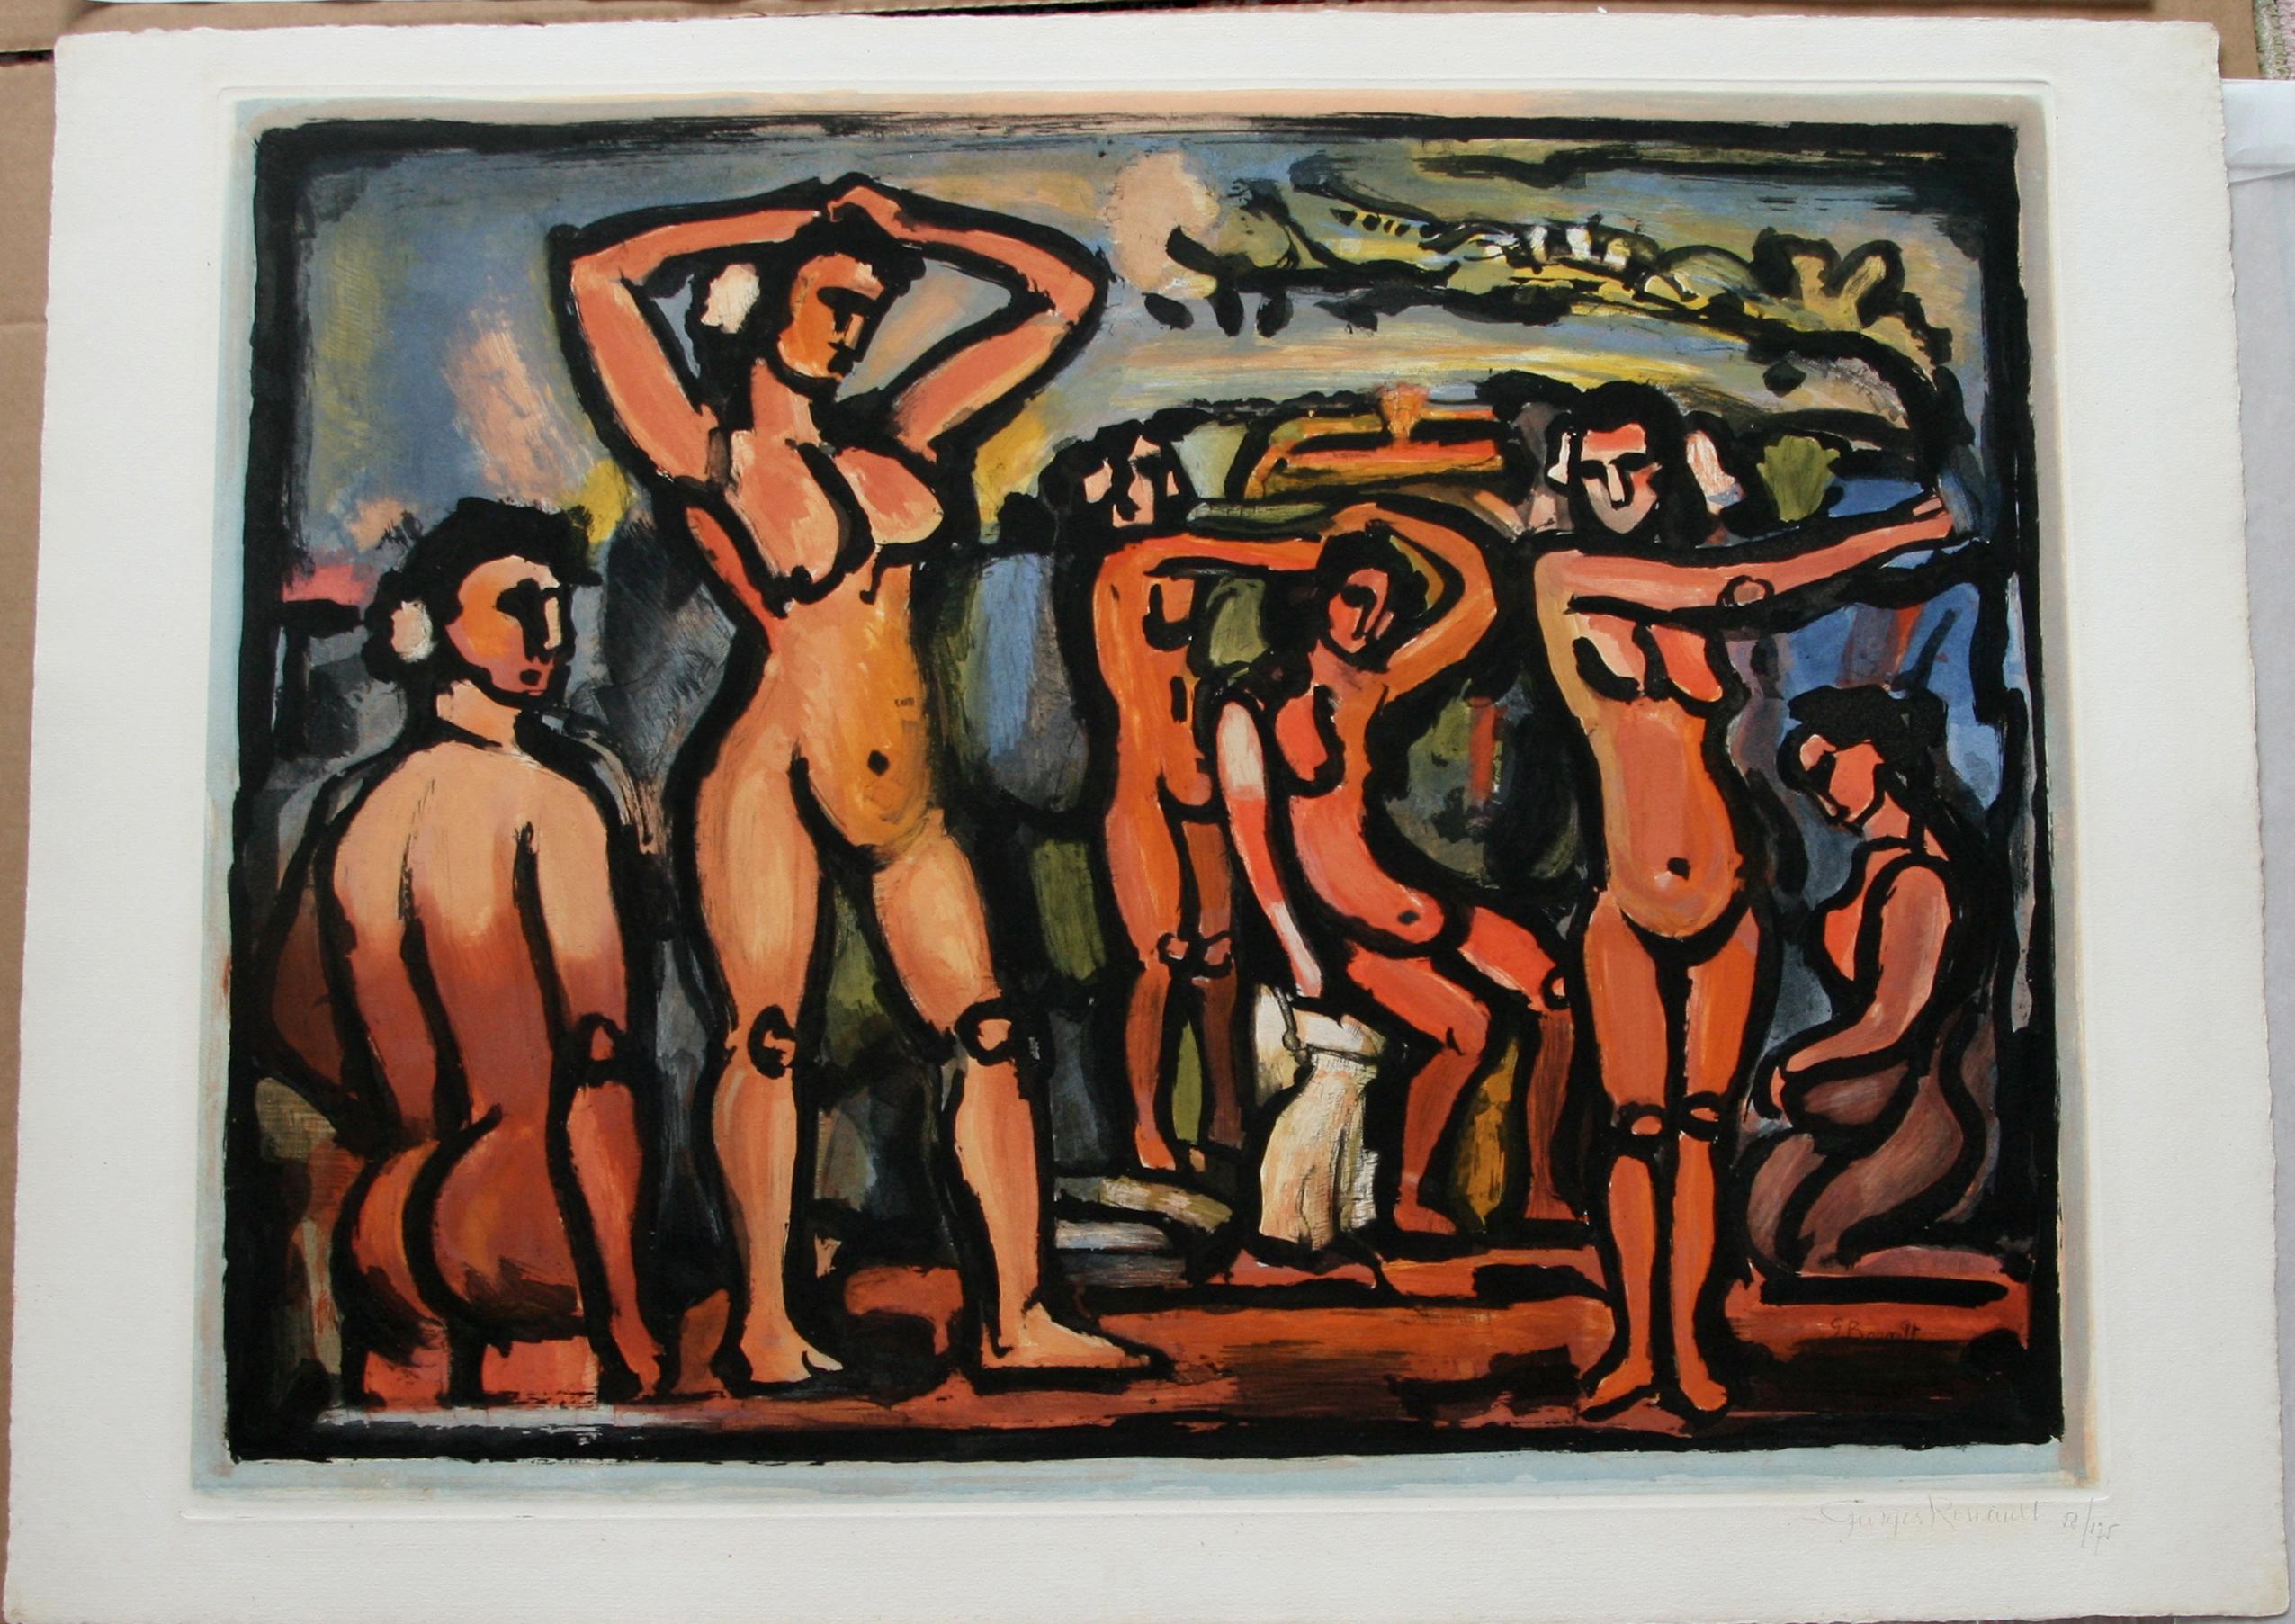 Automne (Autumn) - Expressionist Print by Georges Rouault